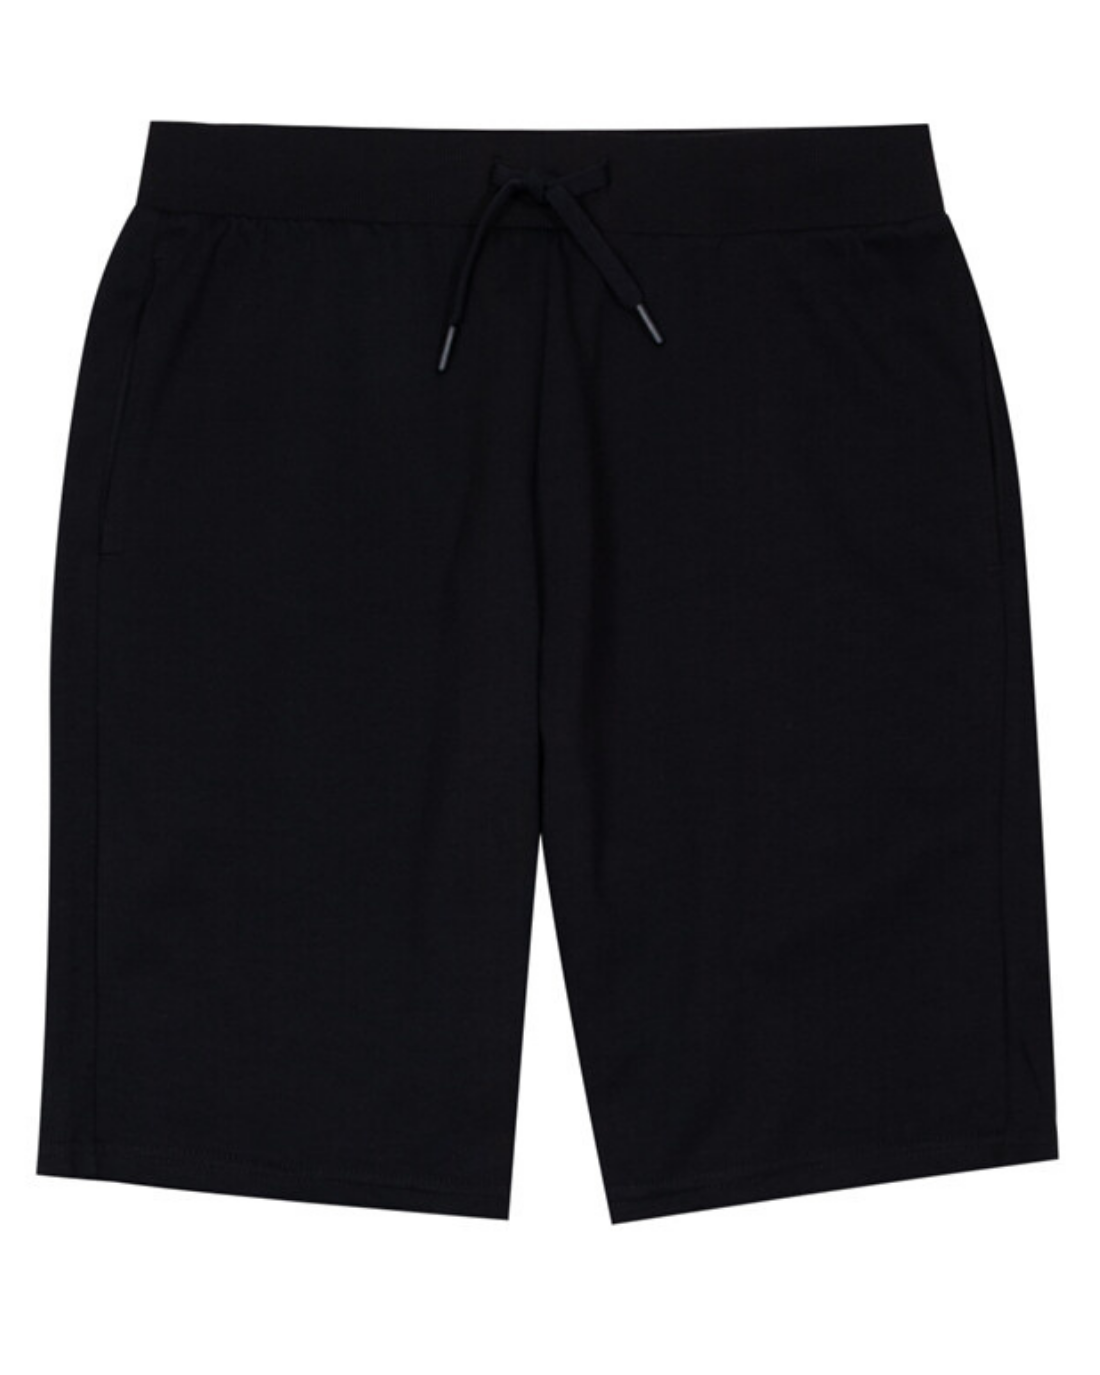 Double Knit Drawstring Shorts 19 Signature Black - Giordano South Africa